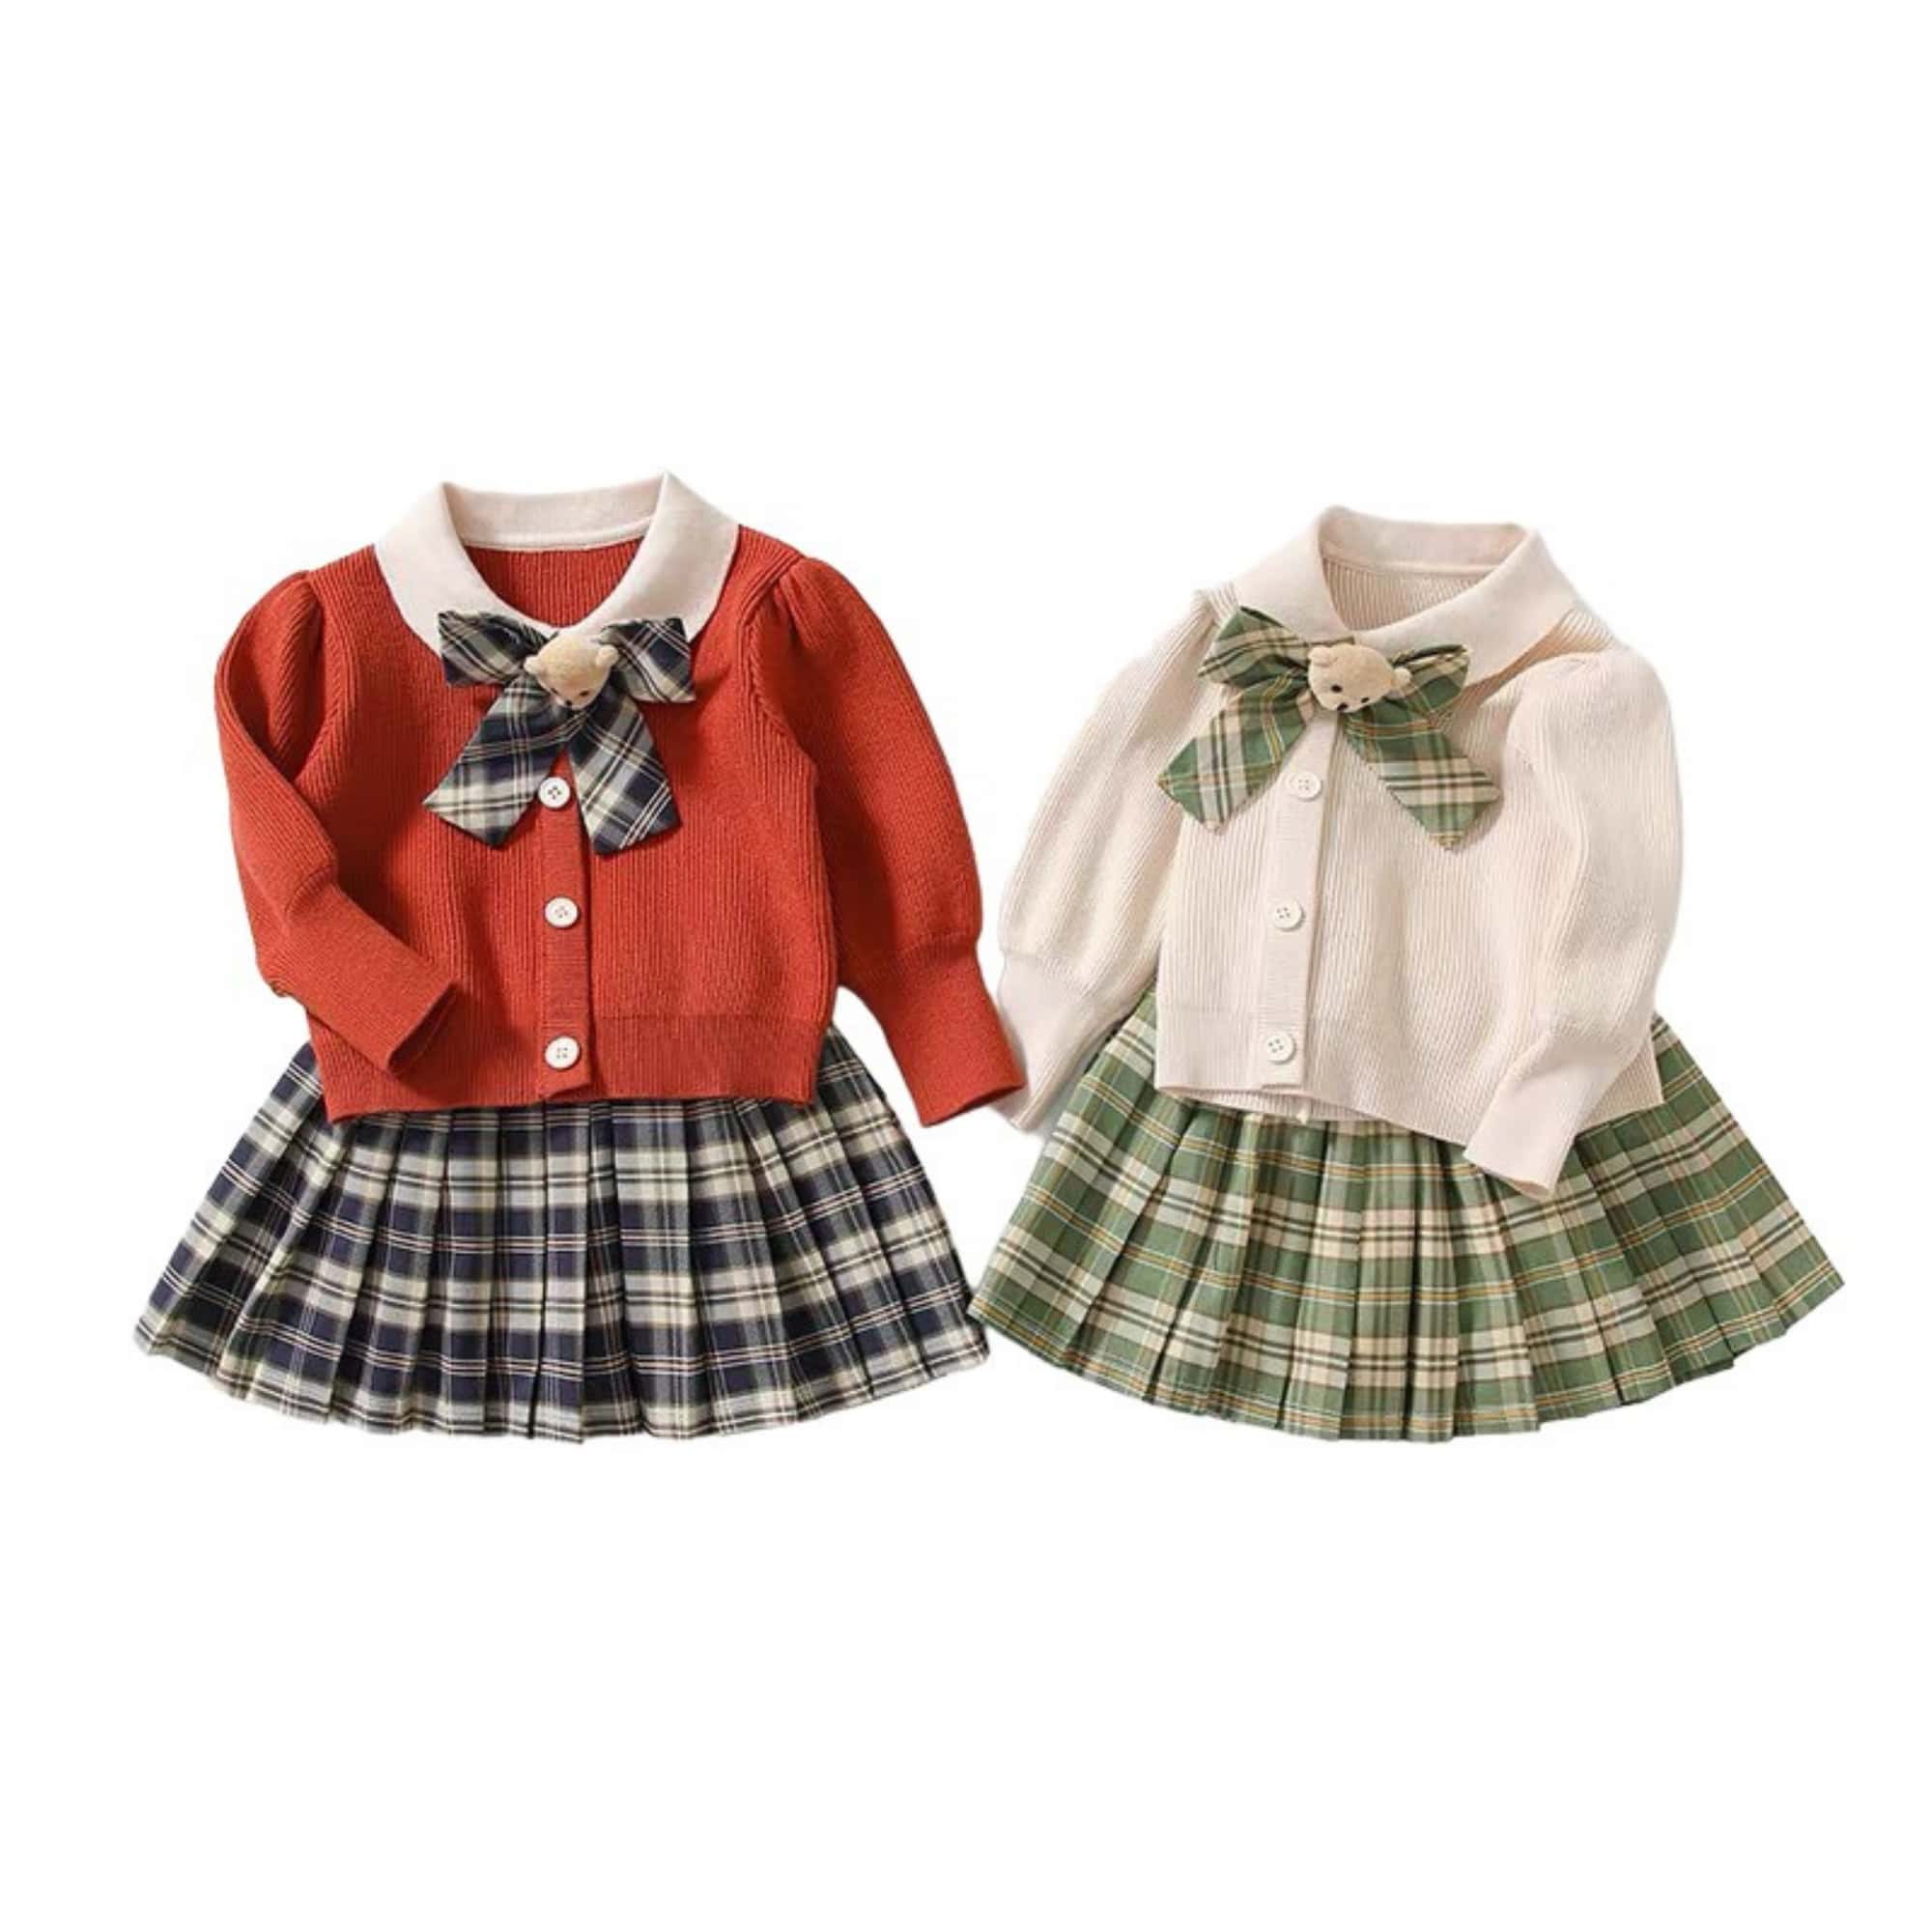 Winter Clothes For Kids Competitive Price 100% Wool Dresses Casual Each One In Opp Bag Vietnam Manufacturer 2